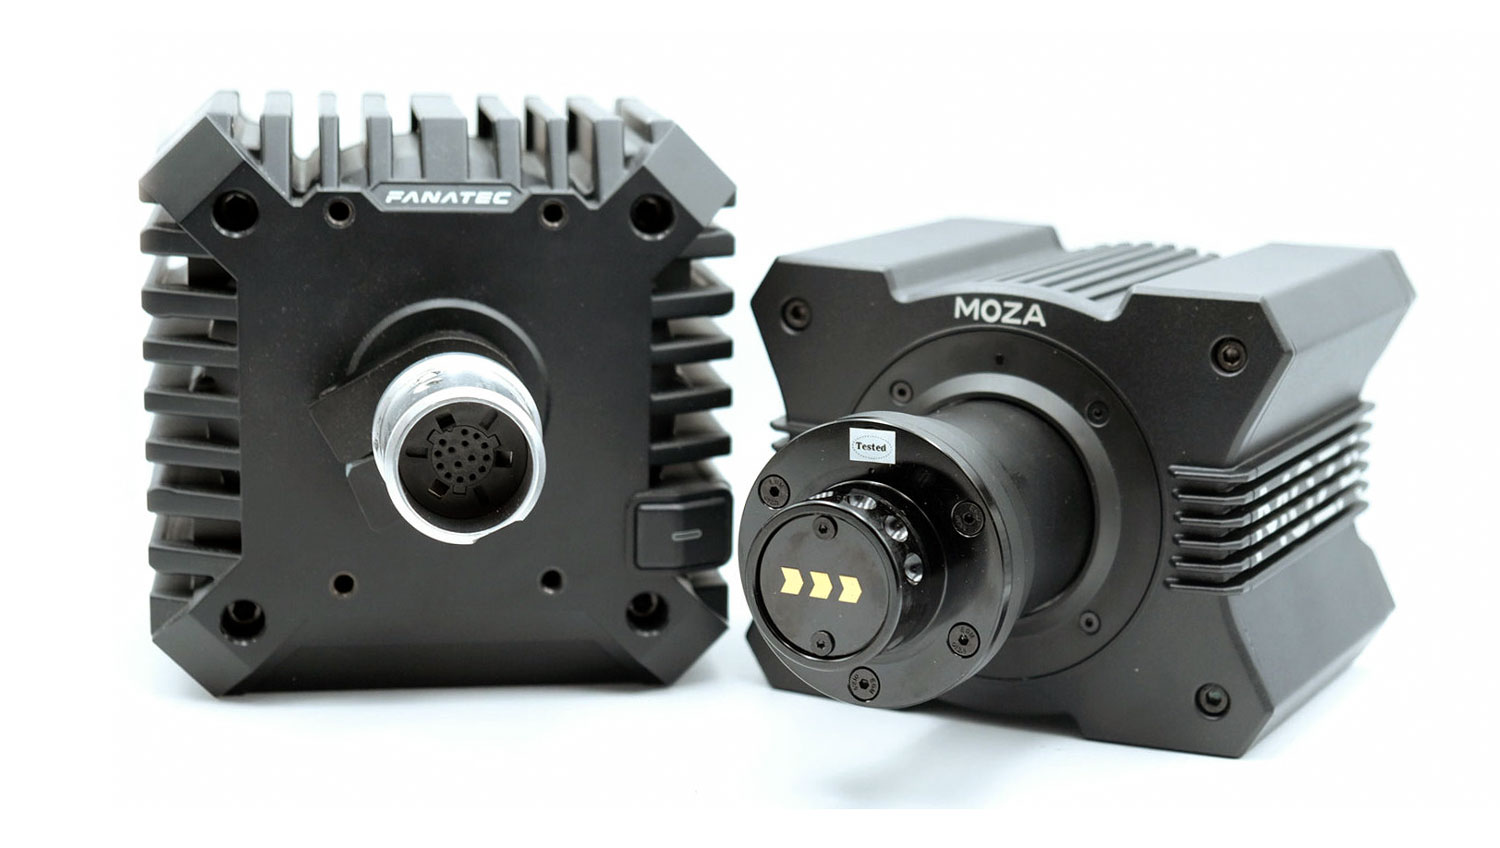 Fanatec VS Moza Racing  Which is the BEST Budget Direct-Drive